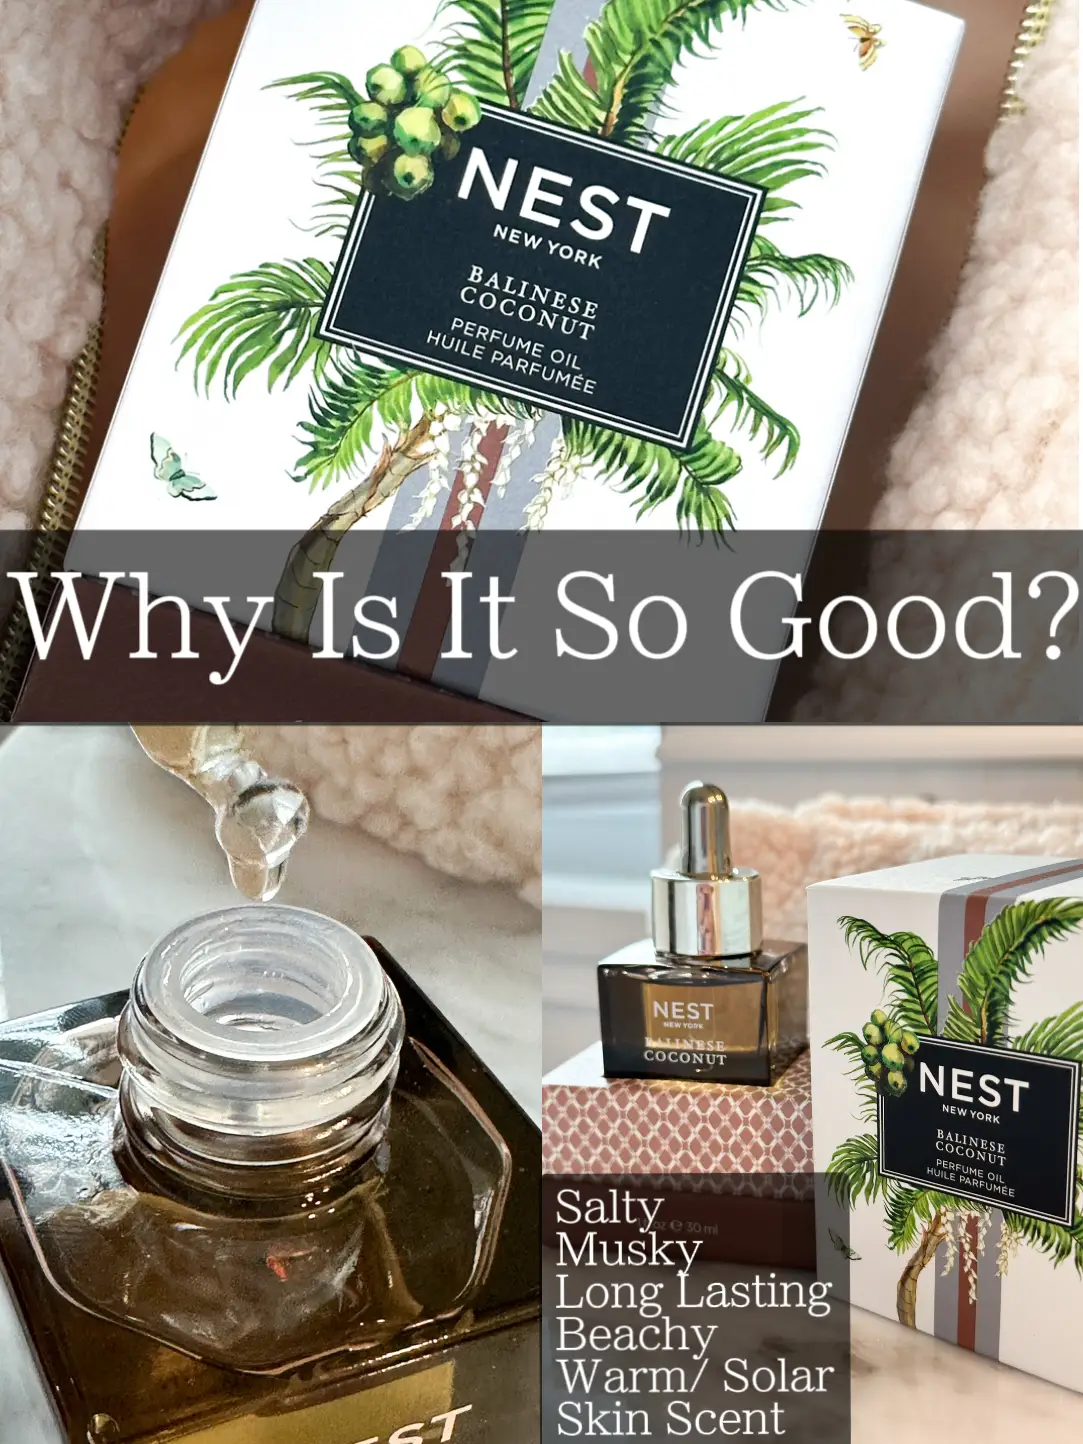 Looking for an intimate Beachy Scent?